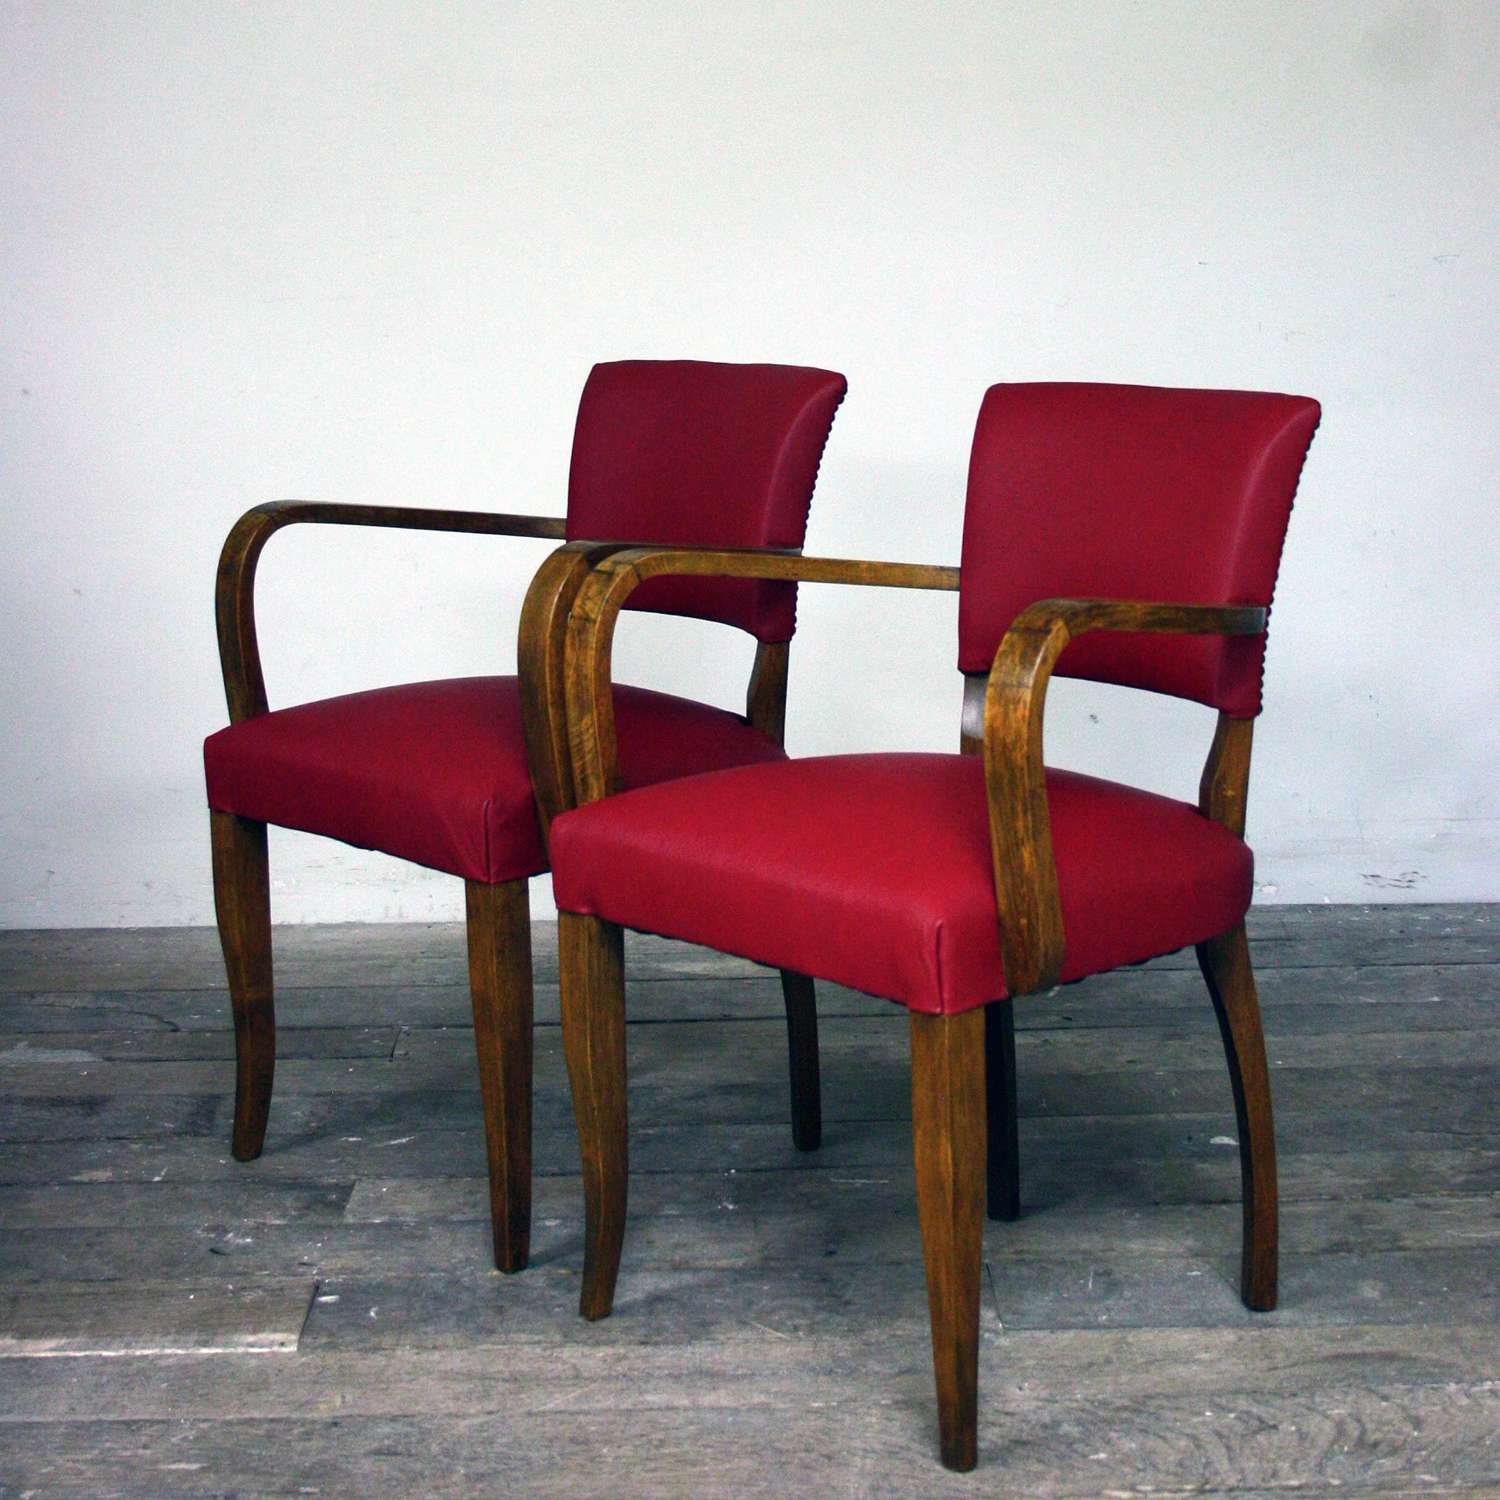 1930's Reupholstered red leather bridge chairs